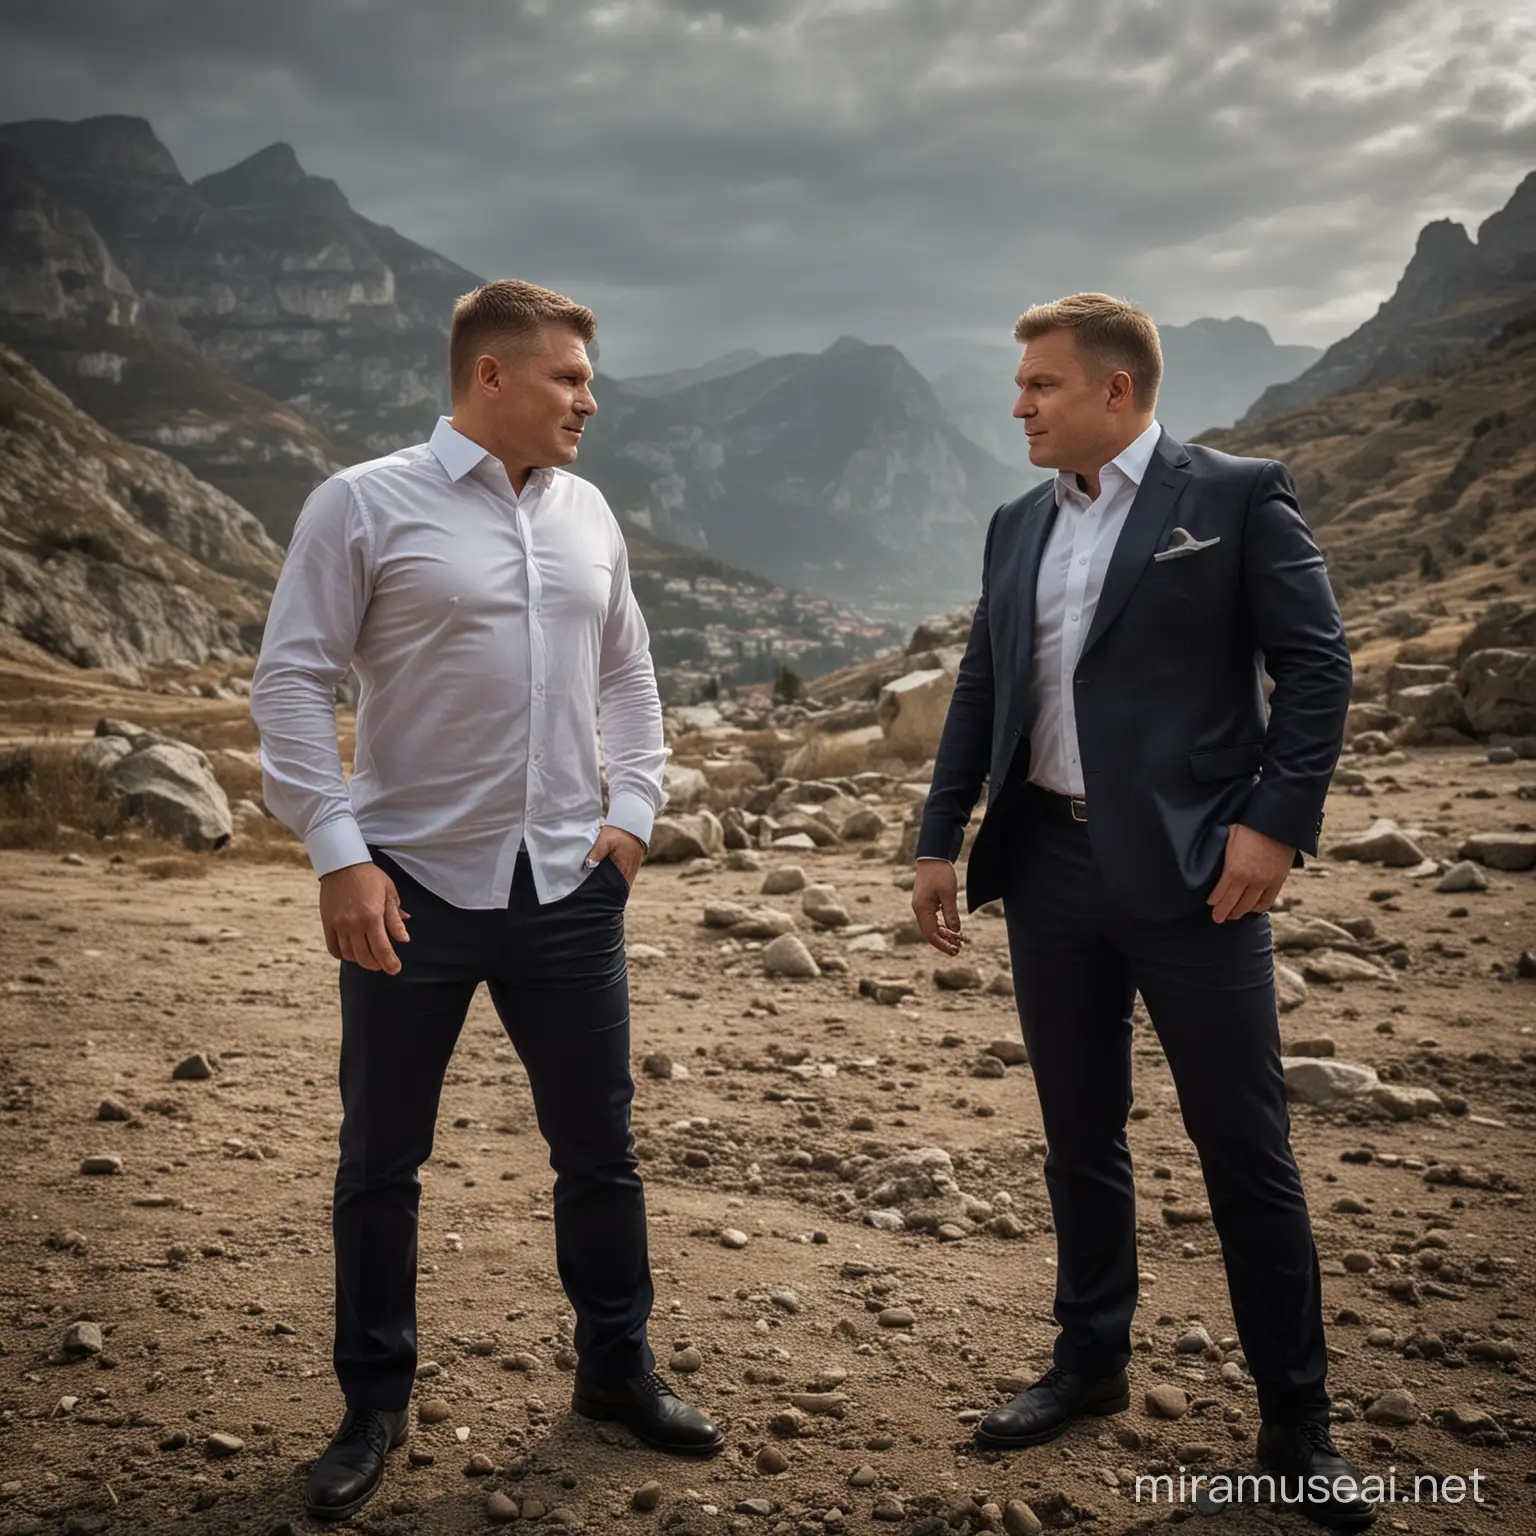 Robert Fico and Peter Pellegrini Political Partners in Conversation